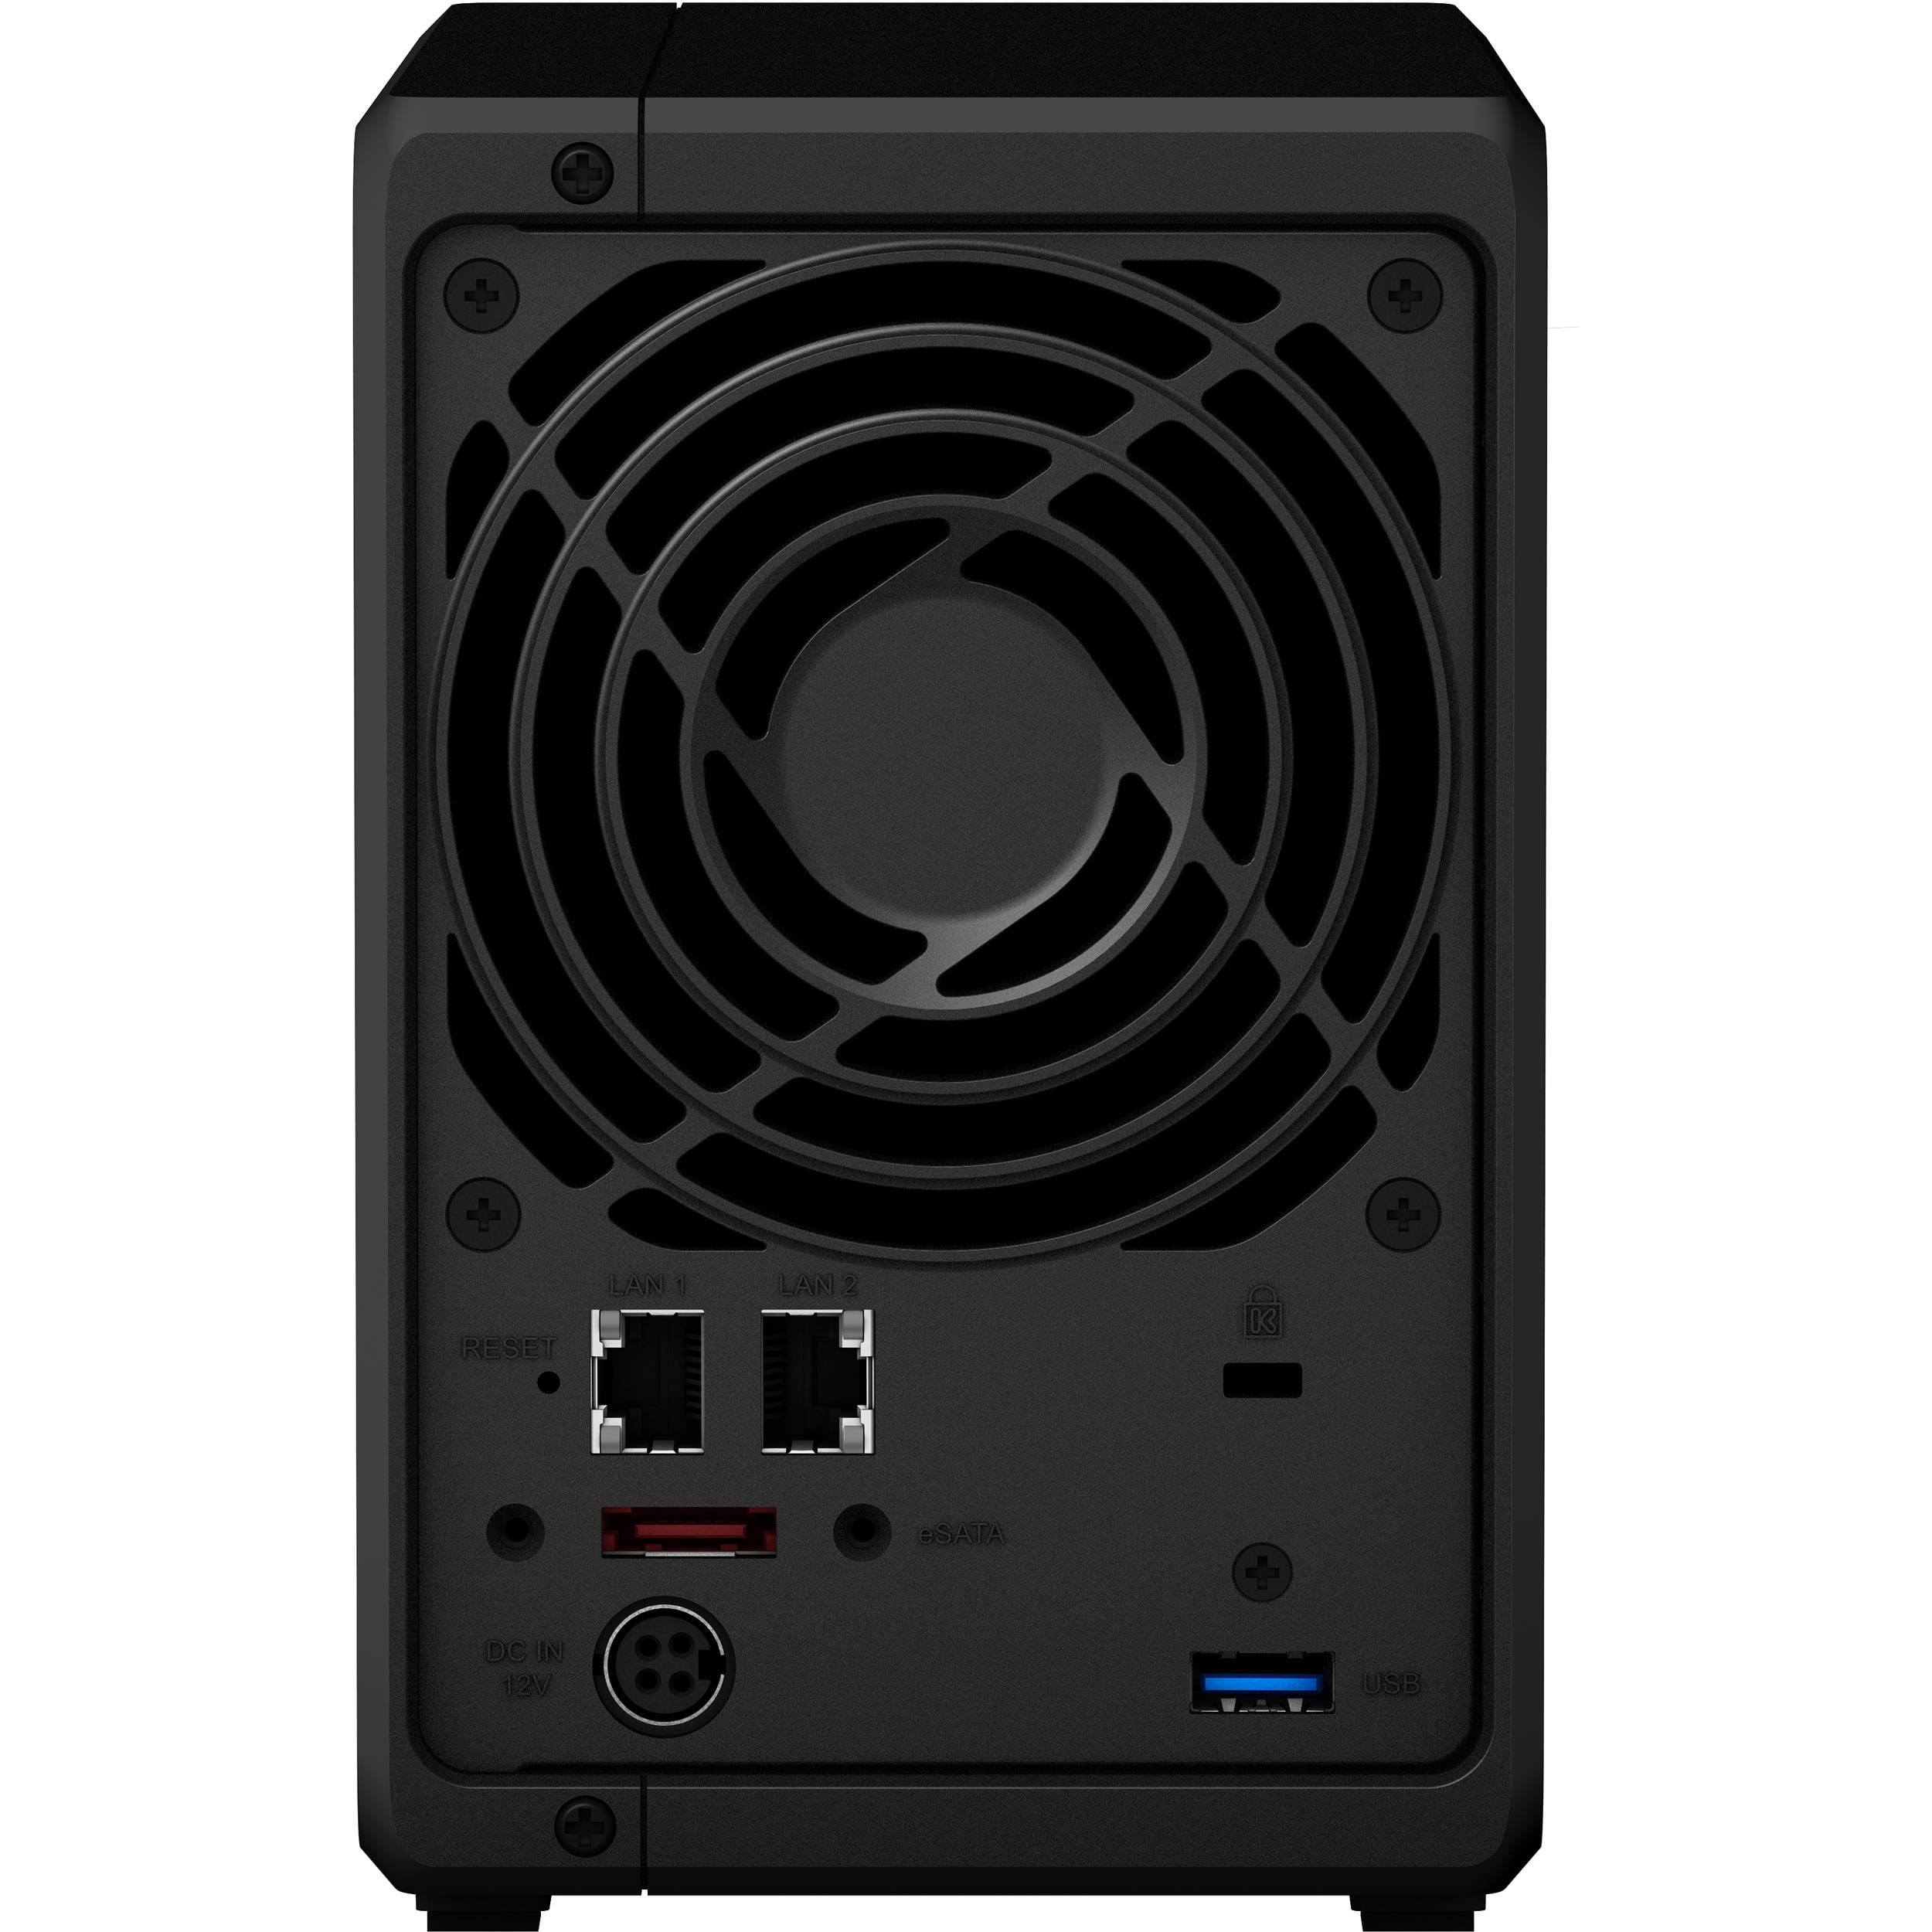 Synology DS720+ NAS Server for Business Celeron CPU, 6GB Memory, 1TB M.2 NVMe SSD, 4TB HDD Storage, Synology DSM Operating System - Walmart.com